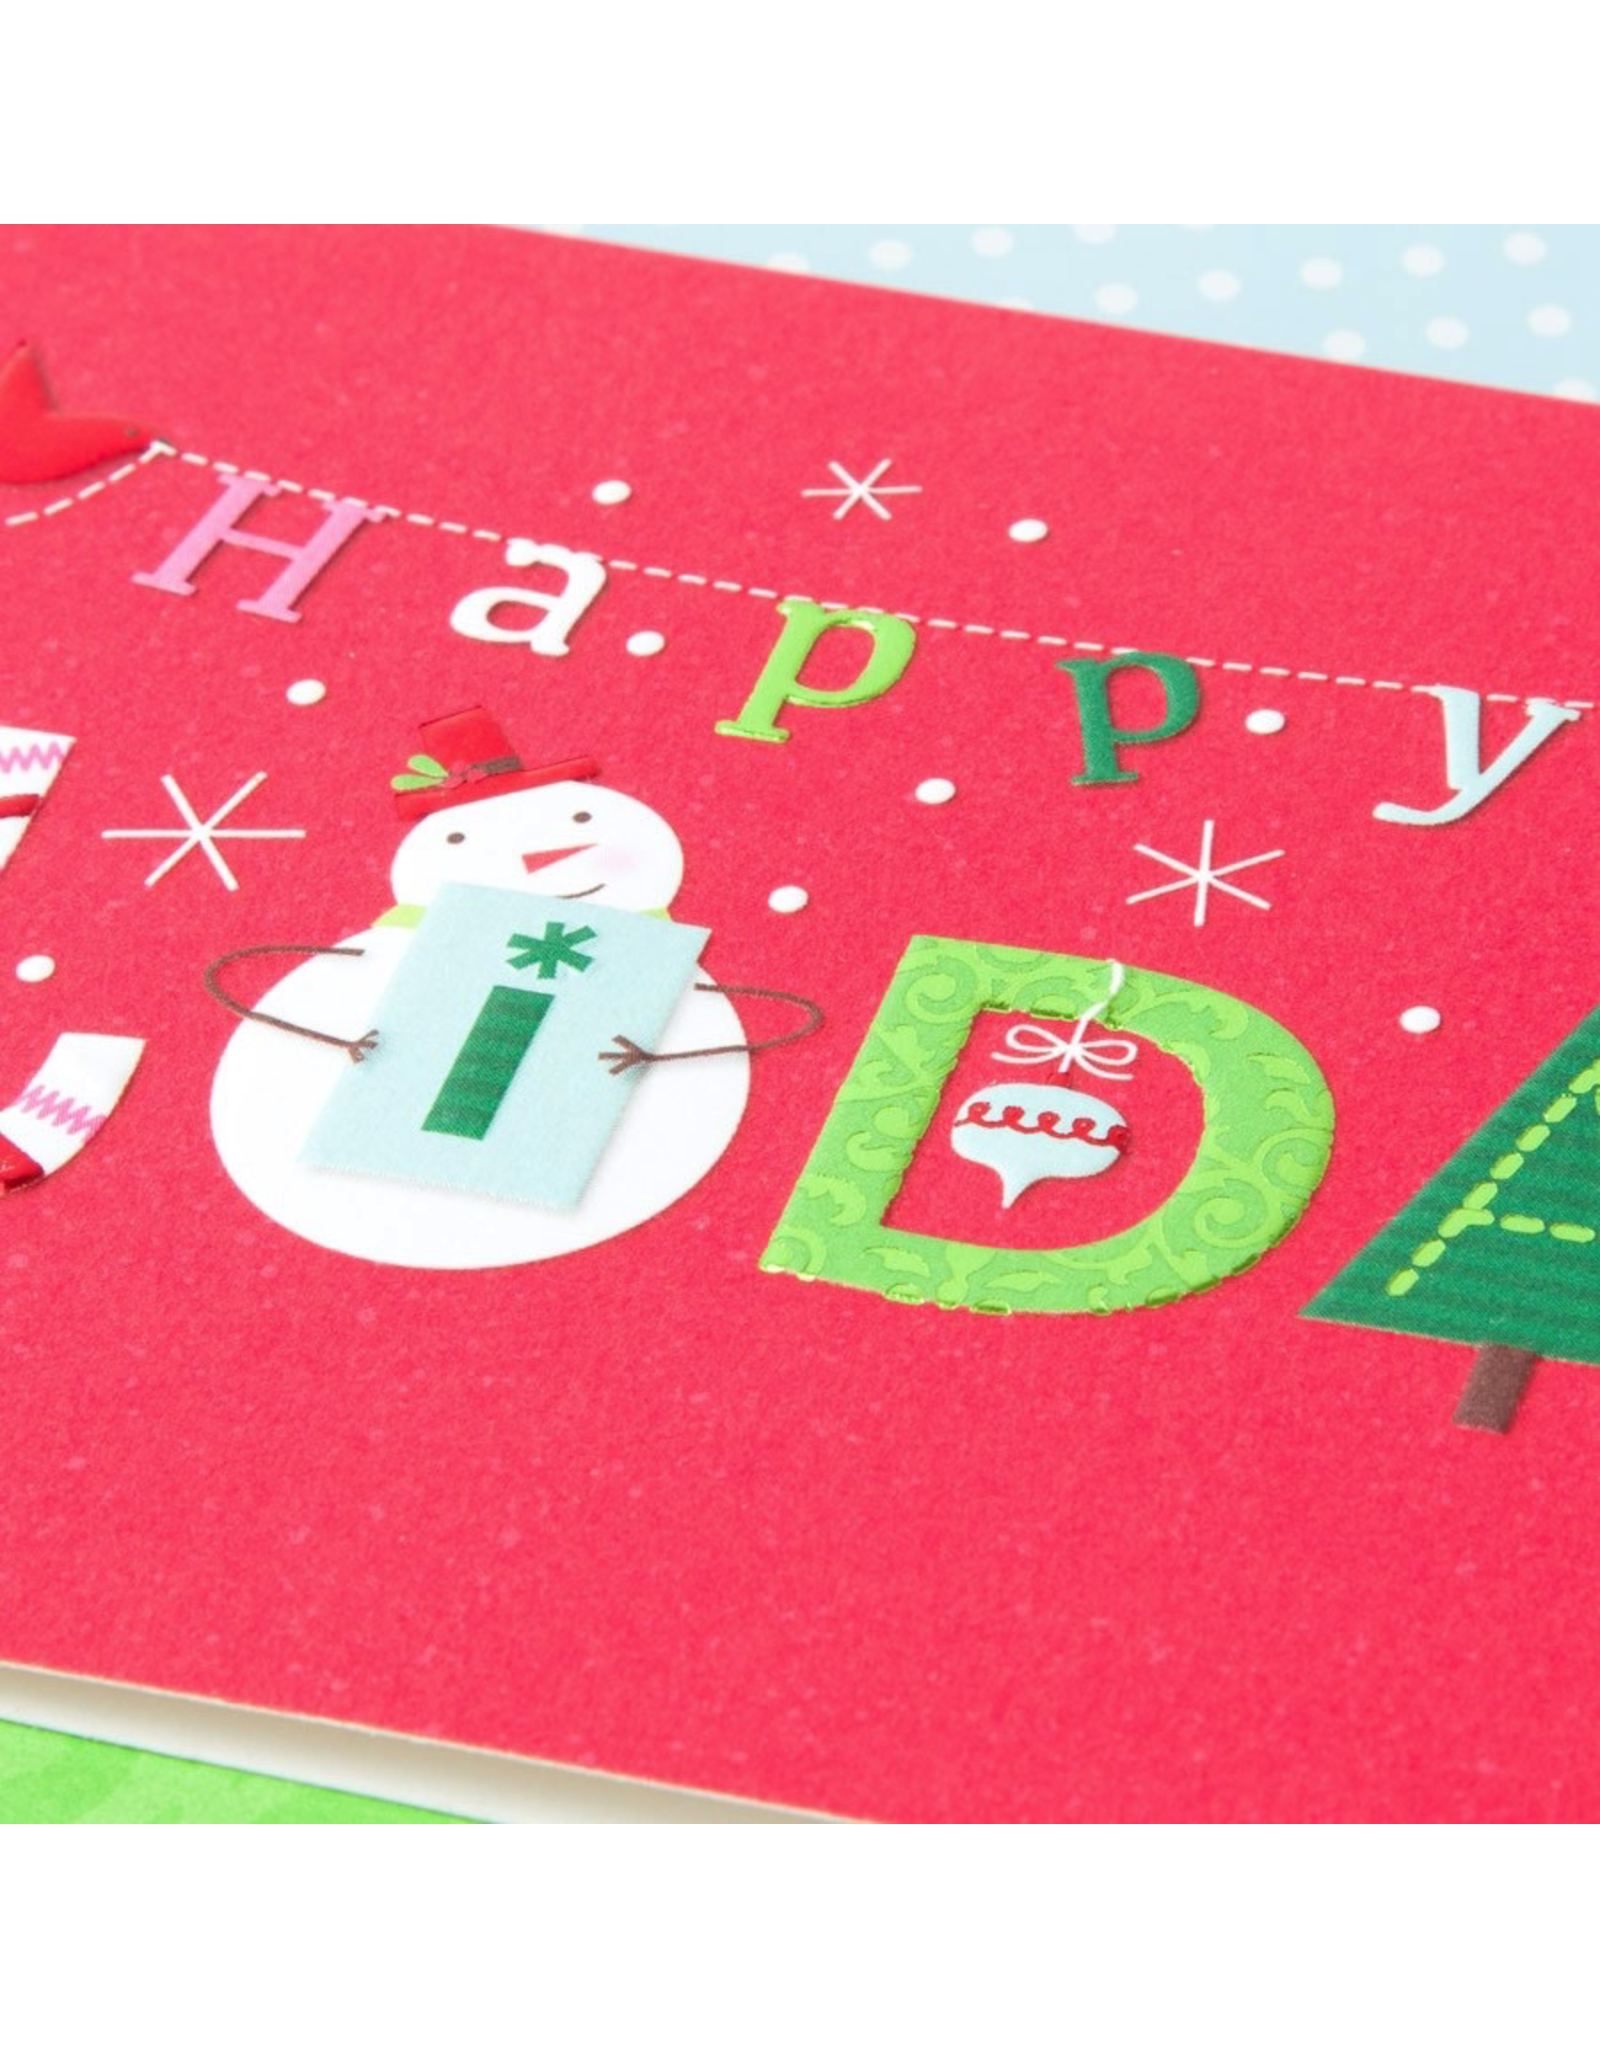 Happy Holidays Holiday Boxed Cards, 14-Count - Papyrus